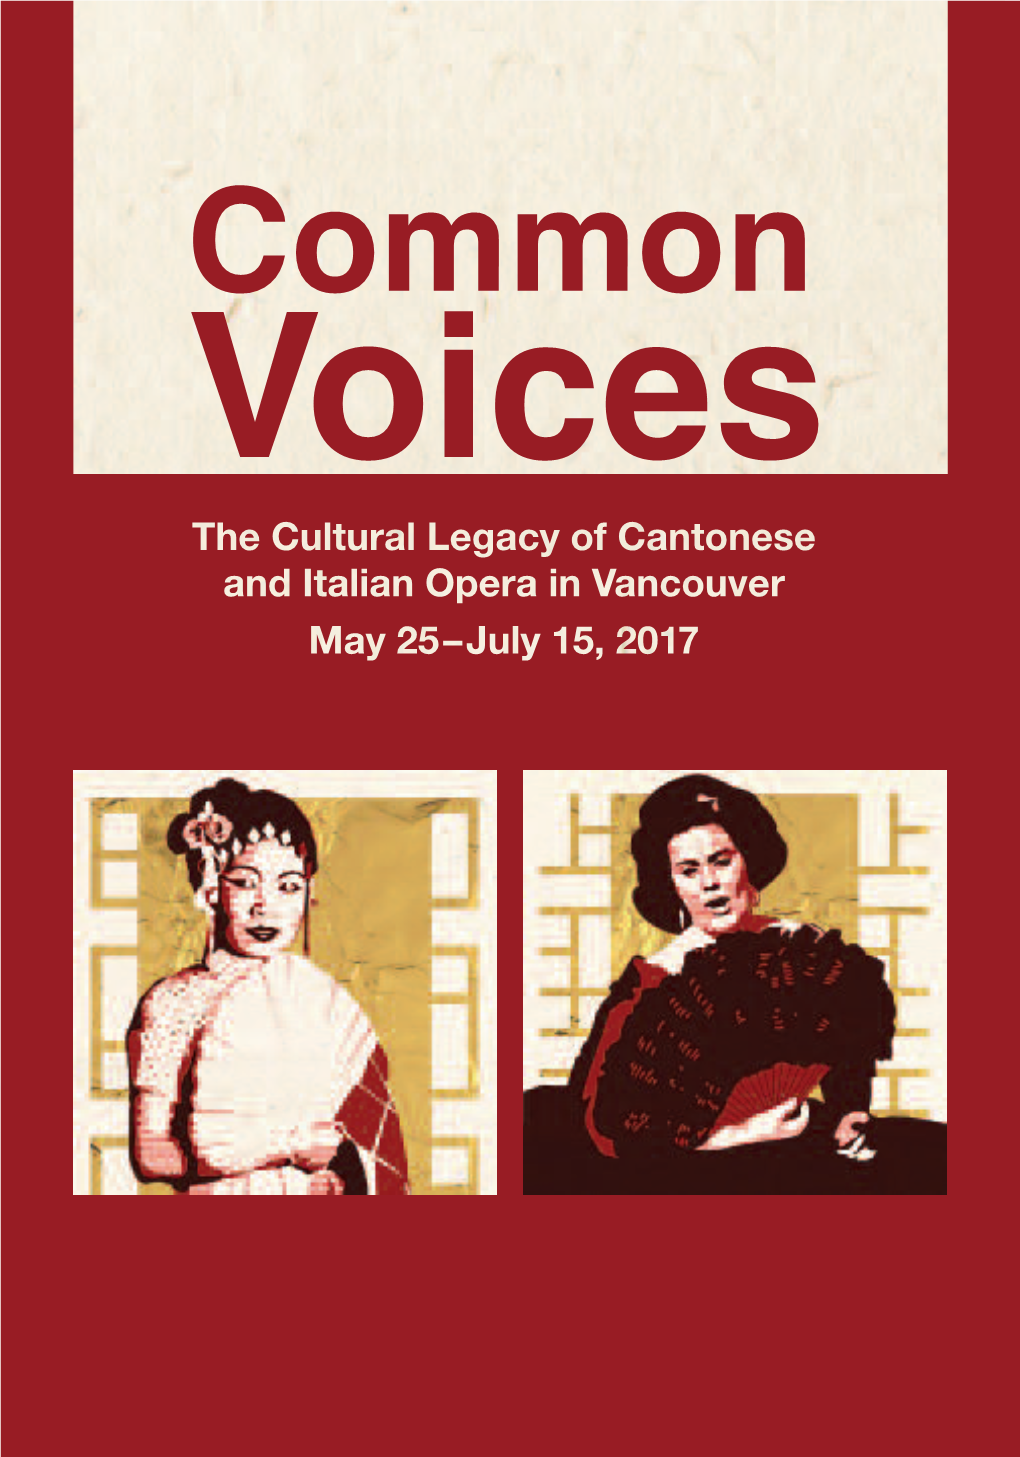 Common Voices: the Cultural Legacy of Italian and Cantonese Opera in Vancouver